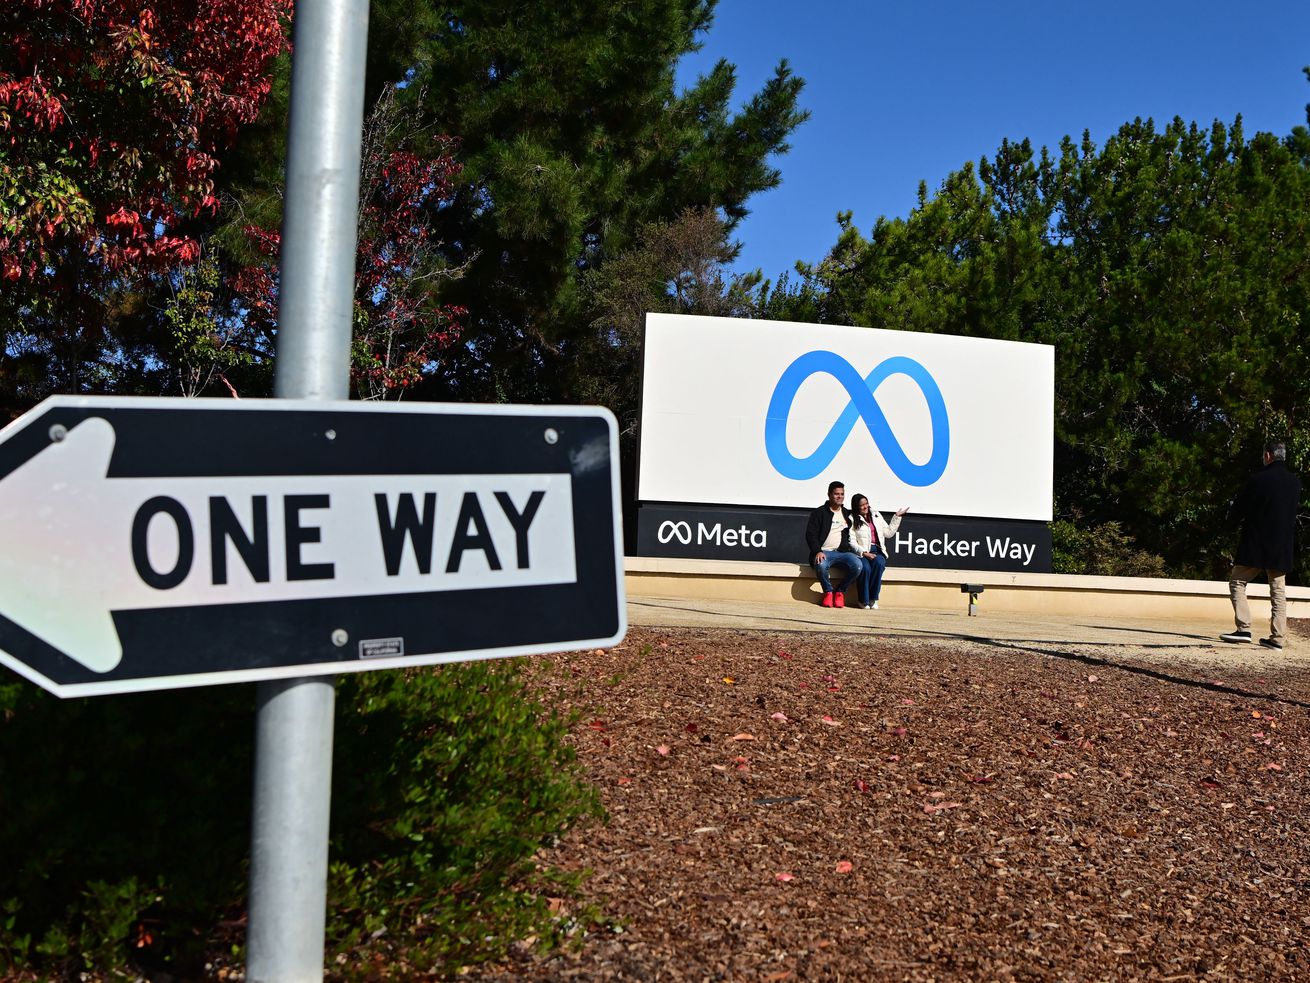 The sign at Meta headquarters, with a one-way traffic sign in the foreground.